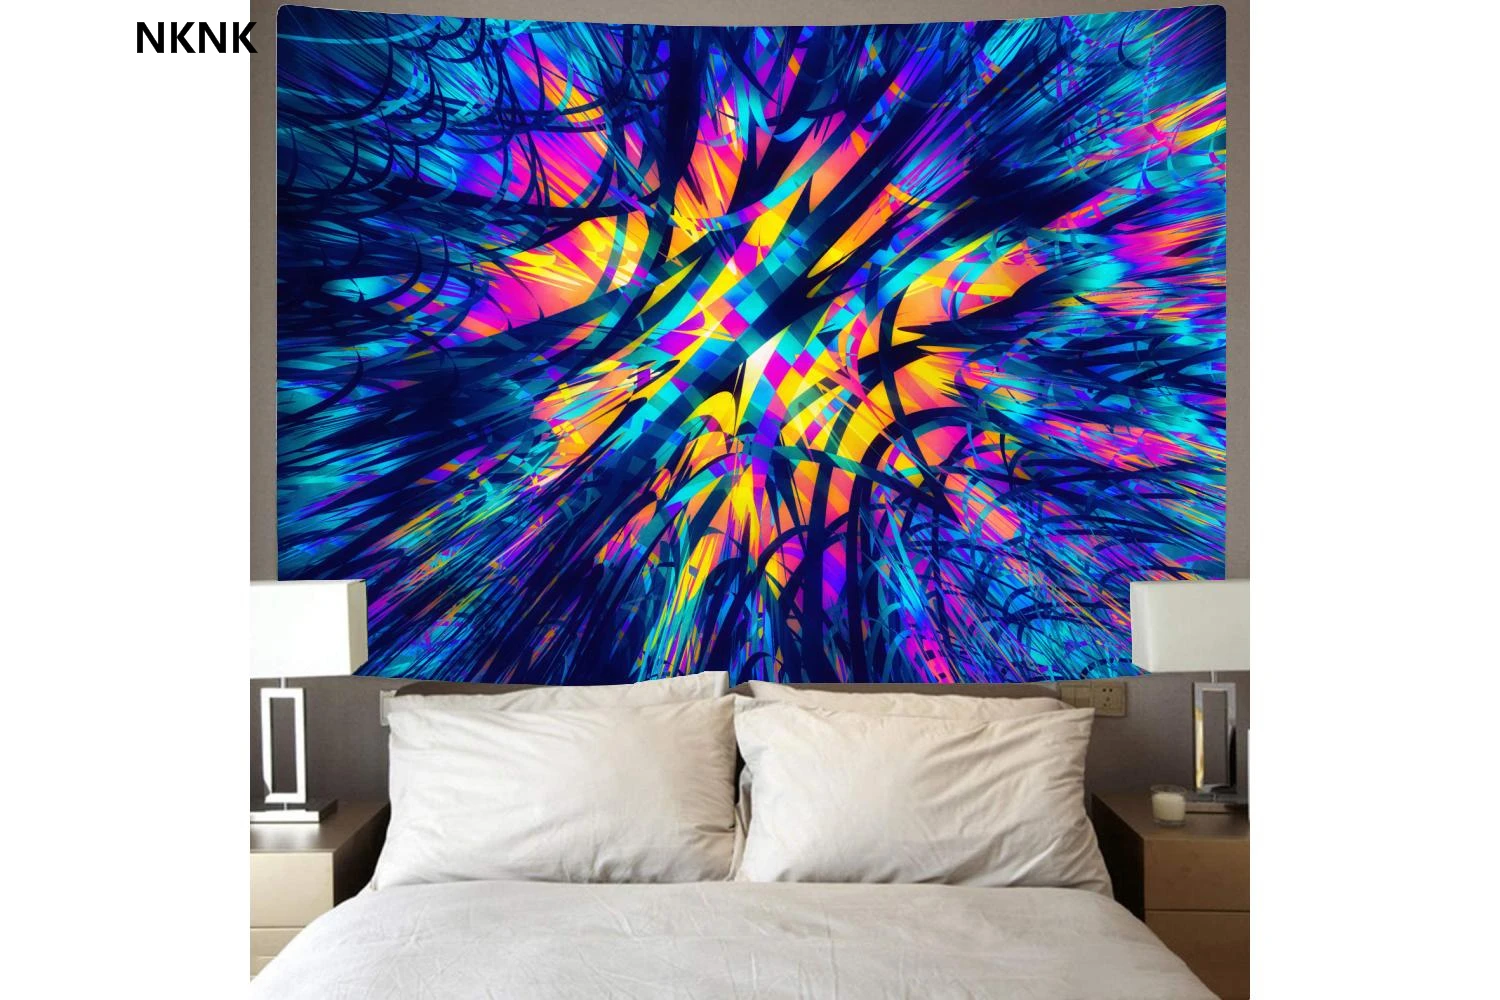 

NKNK Geometric Tapiz Psychedelic Home Tapestrys Vortex Tapestries Color Tenture Mandala Wall Hanging Boho decor Hippie Printed